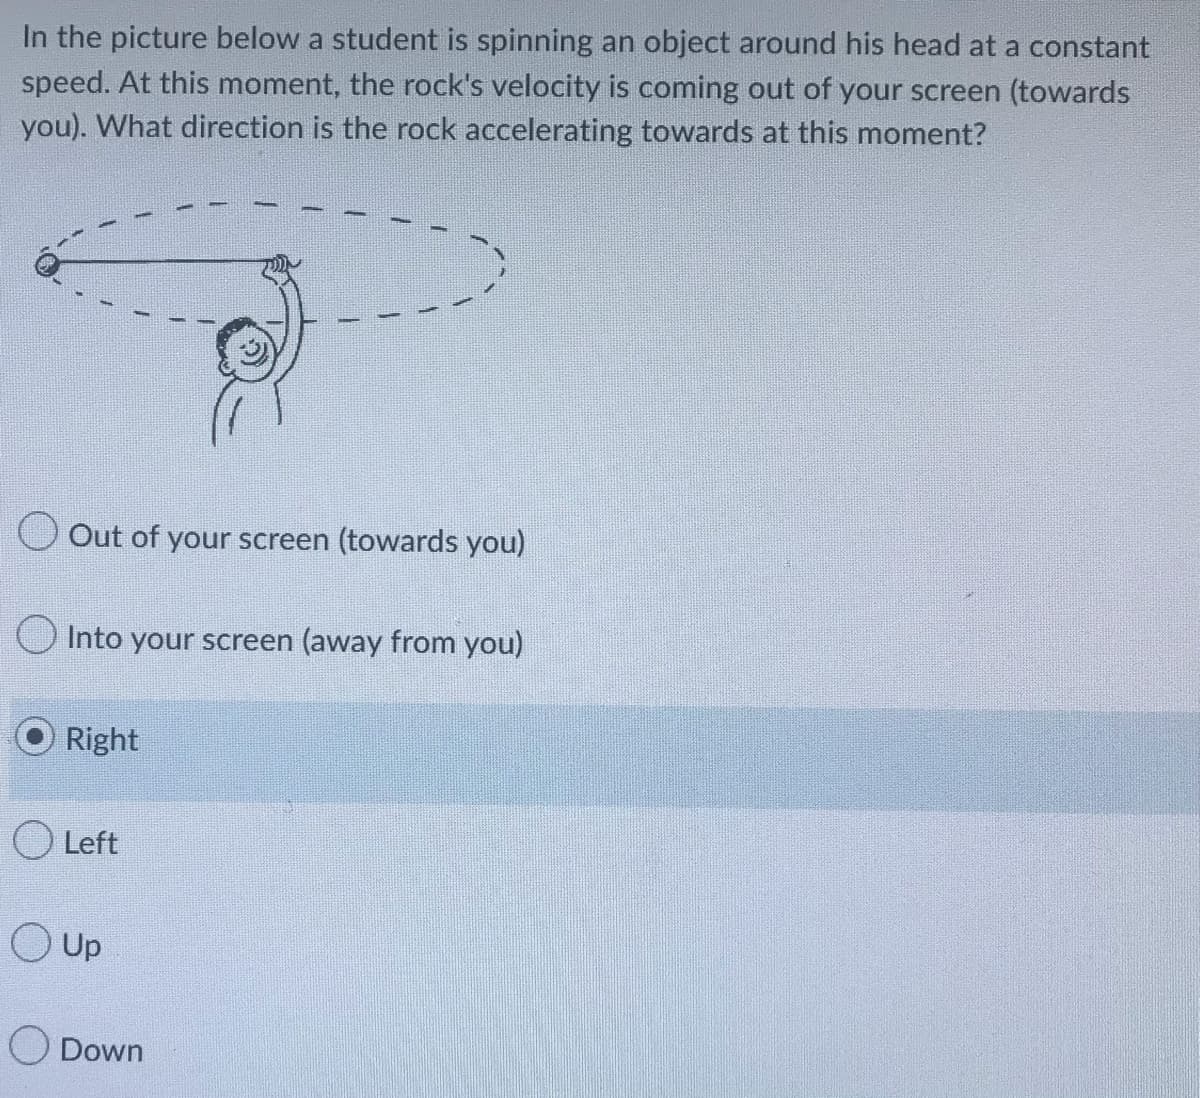 In the picture below a student is spinning an object around his head at a constant
speed. At this moment, the rock's velocity is coming out of your screen (towards
you). What direction is the rock accelerating towards at this moment?
Out of your screen (towards you)
Into your screen (away from you)
Right
O Left
Up
Down